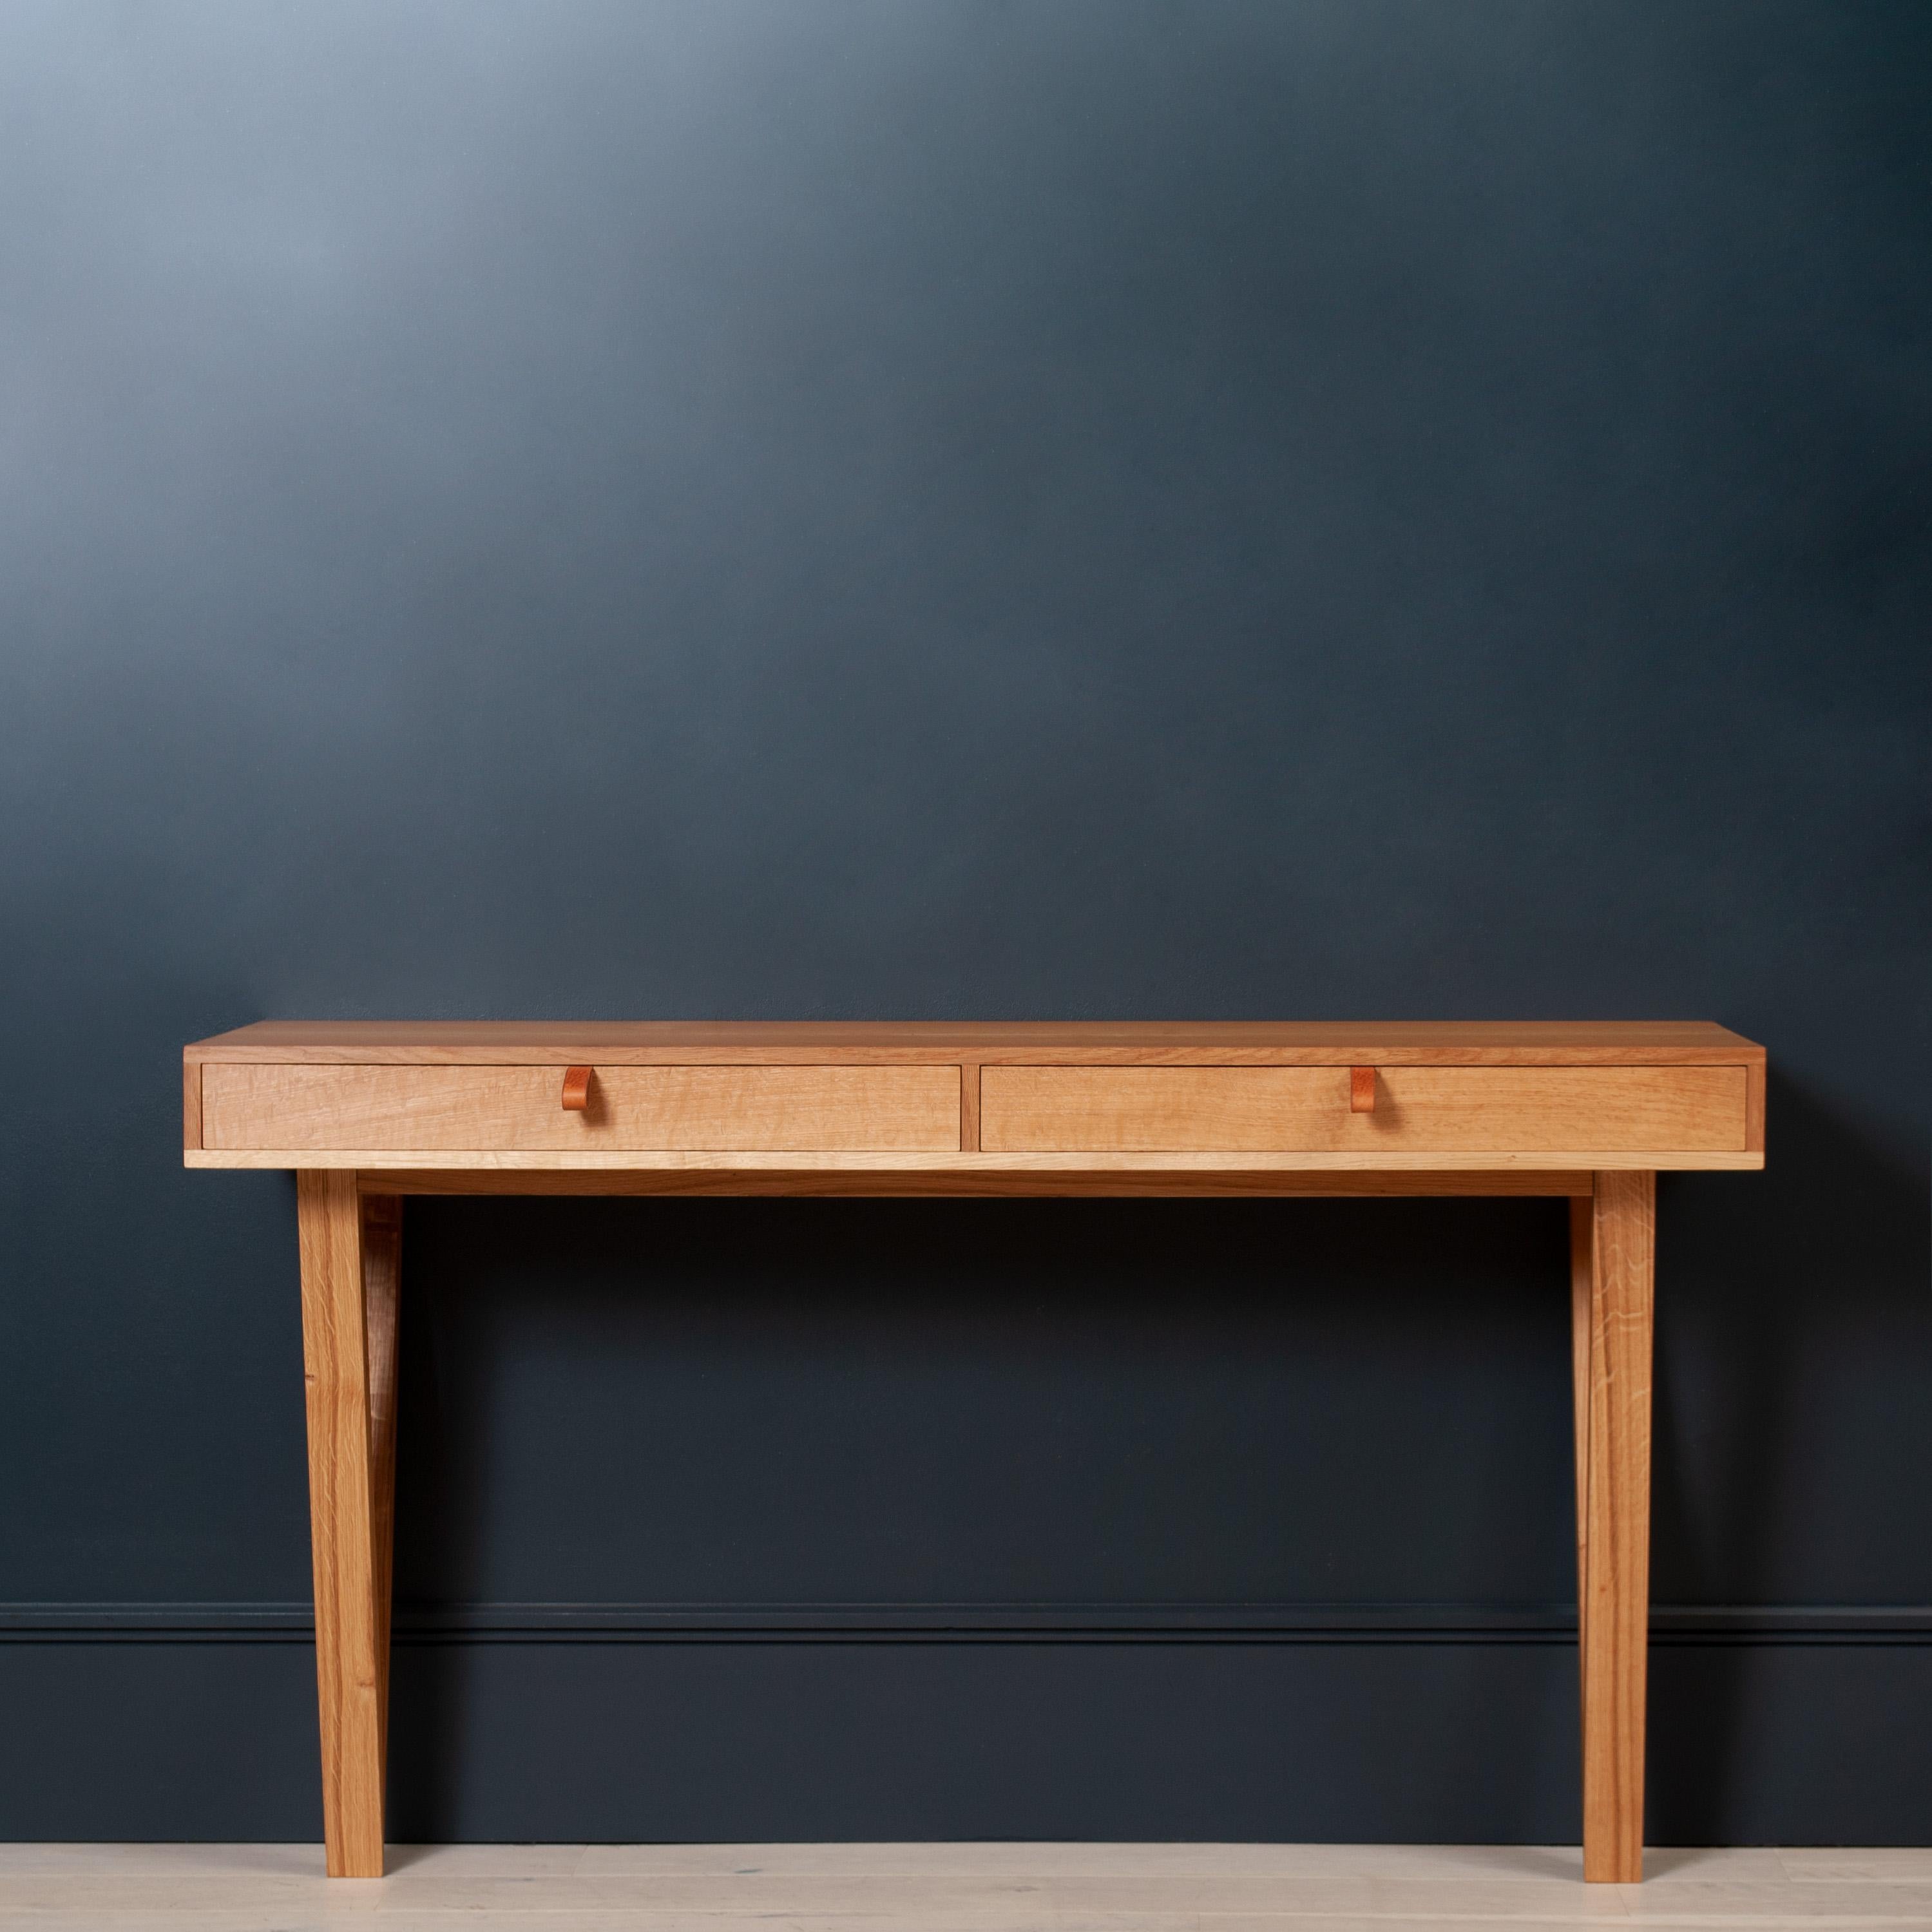 Hand-Crafted Handcrafted English Oak Desk Console For Sale